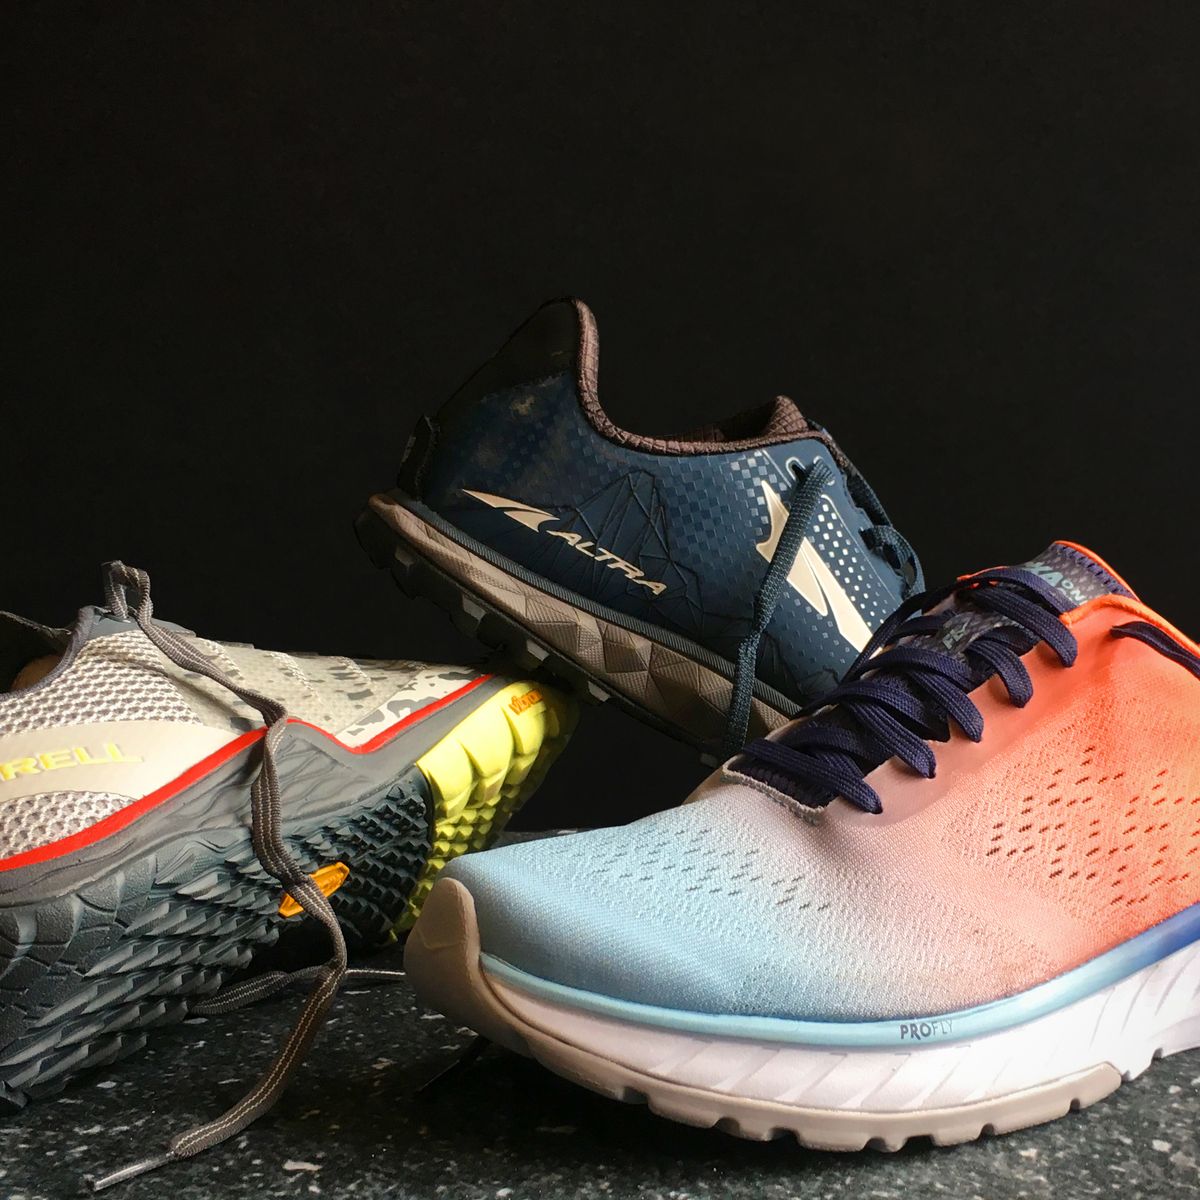 Does a Shoe's Heel-to-Toe Drop Matter? | Do Minimalist Shoes Lower Injury Rates?